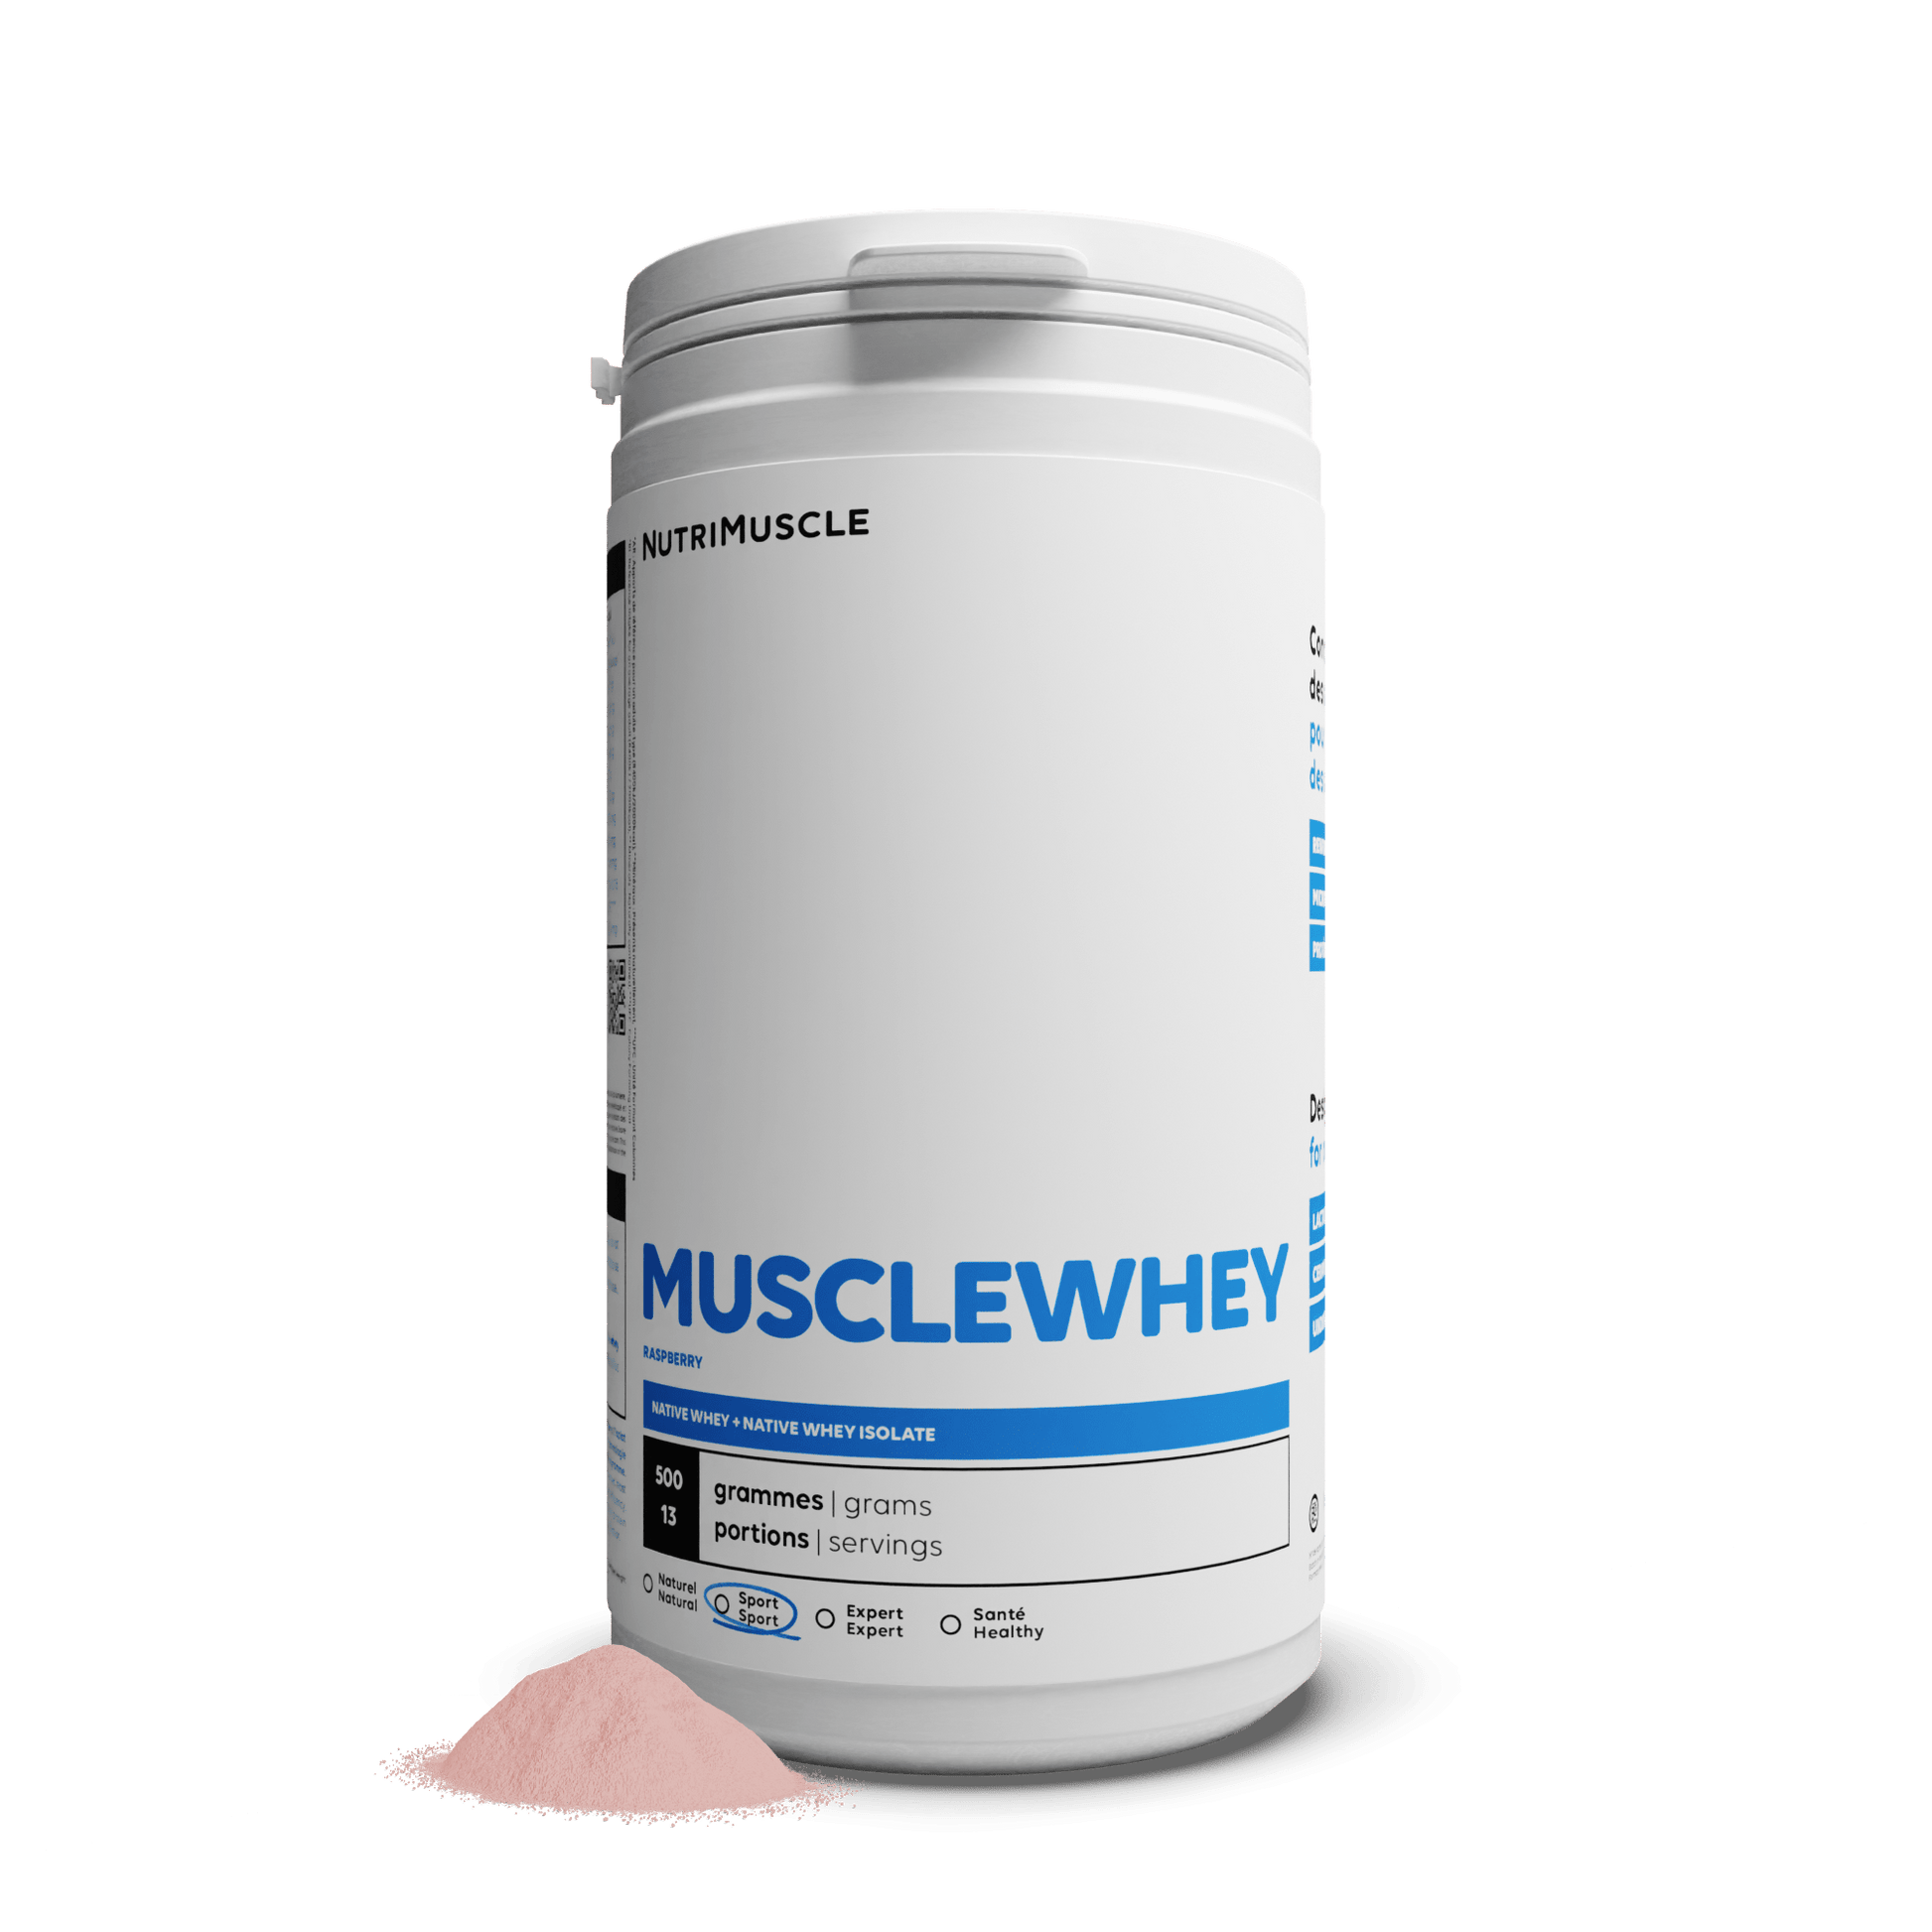 Nutrimuscle Protéines Framboise / 500 g Musclewhey - Mix Protein